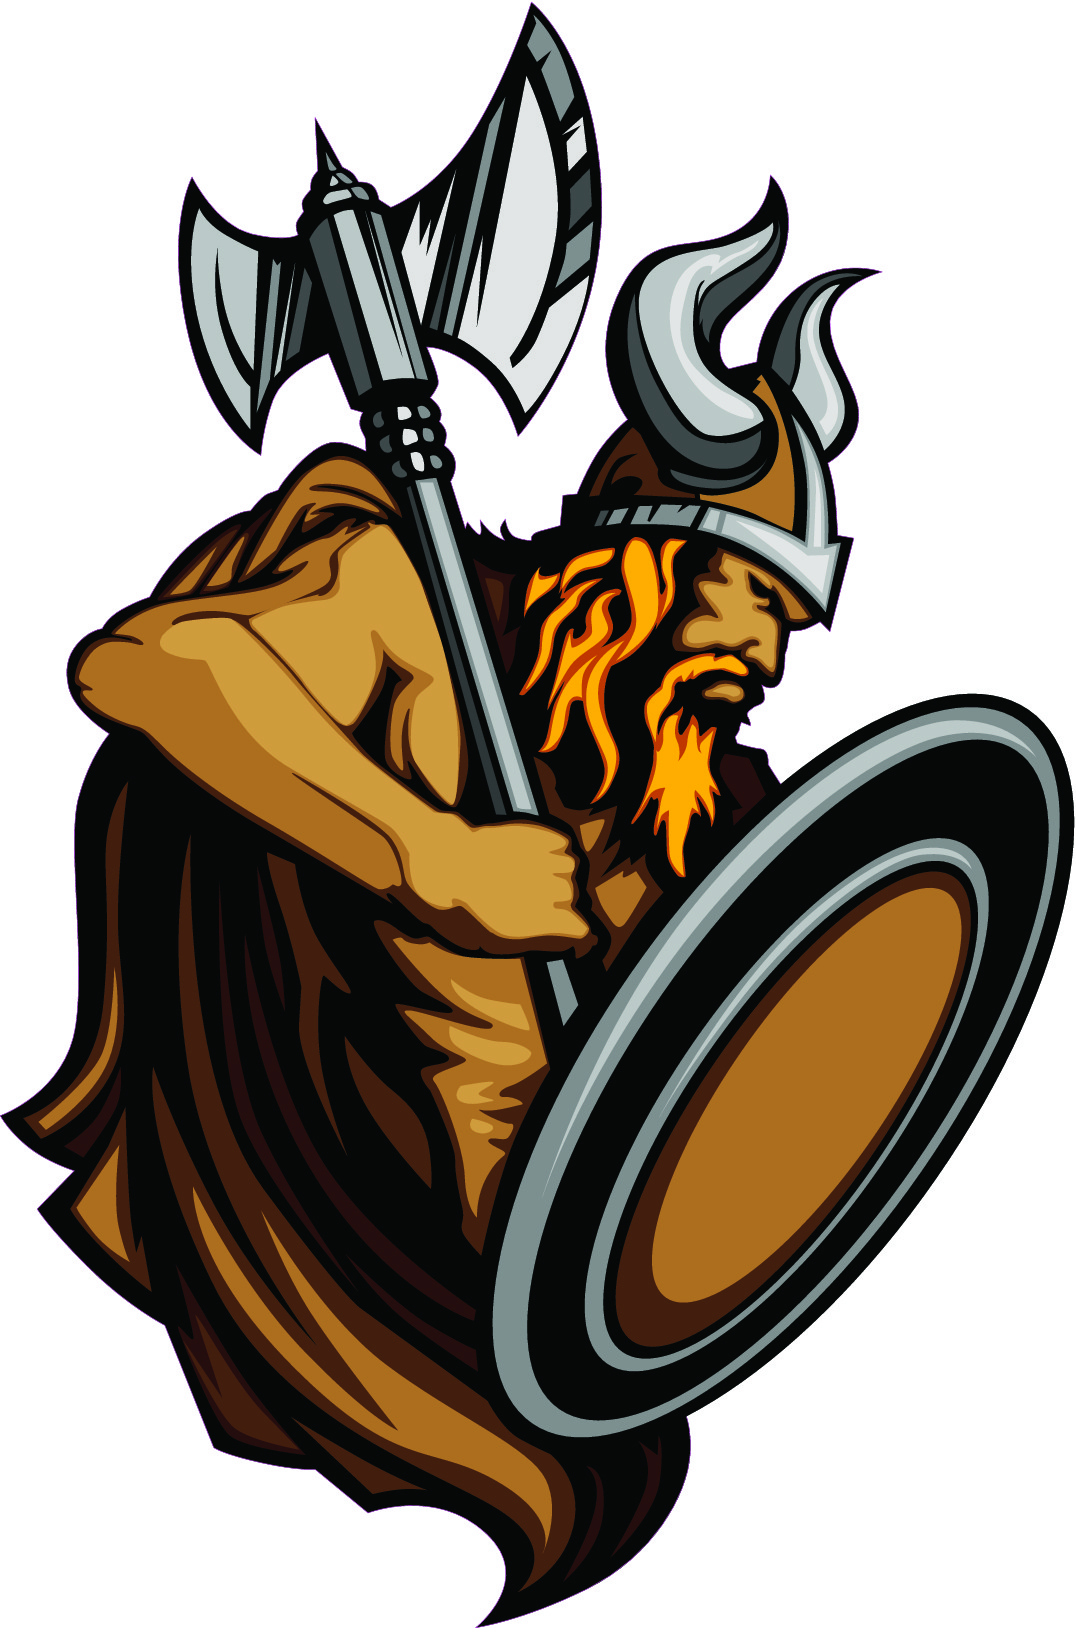 Viking with an axe and shield